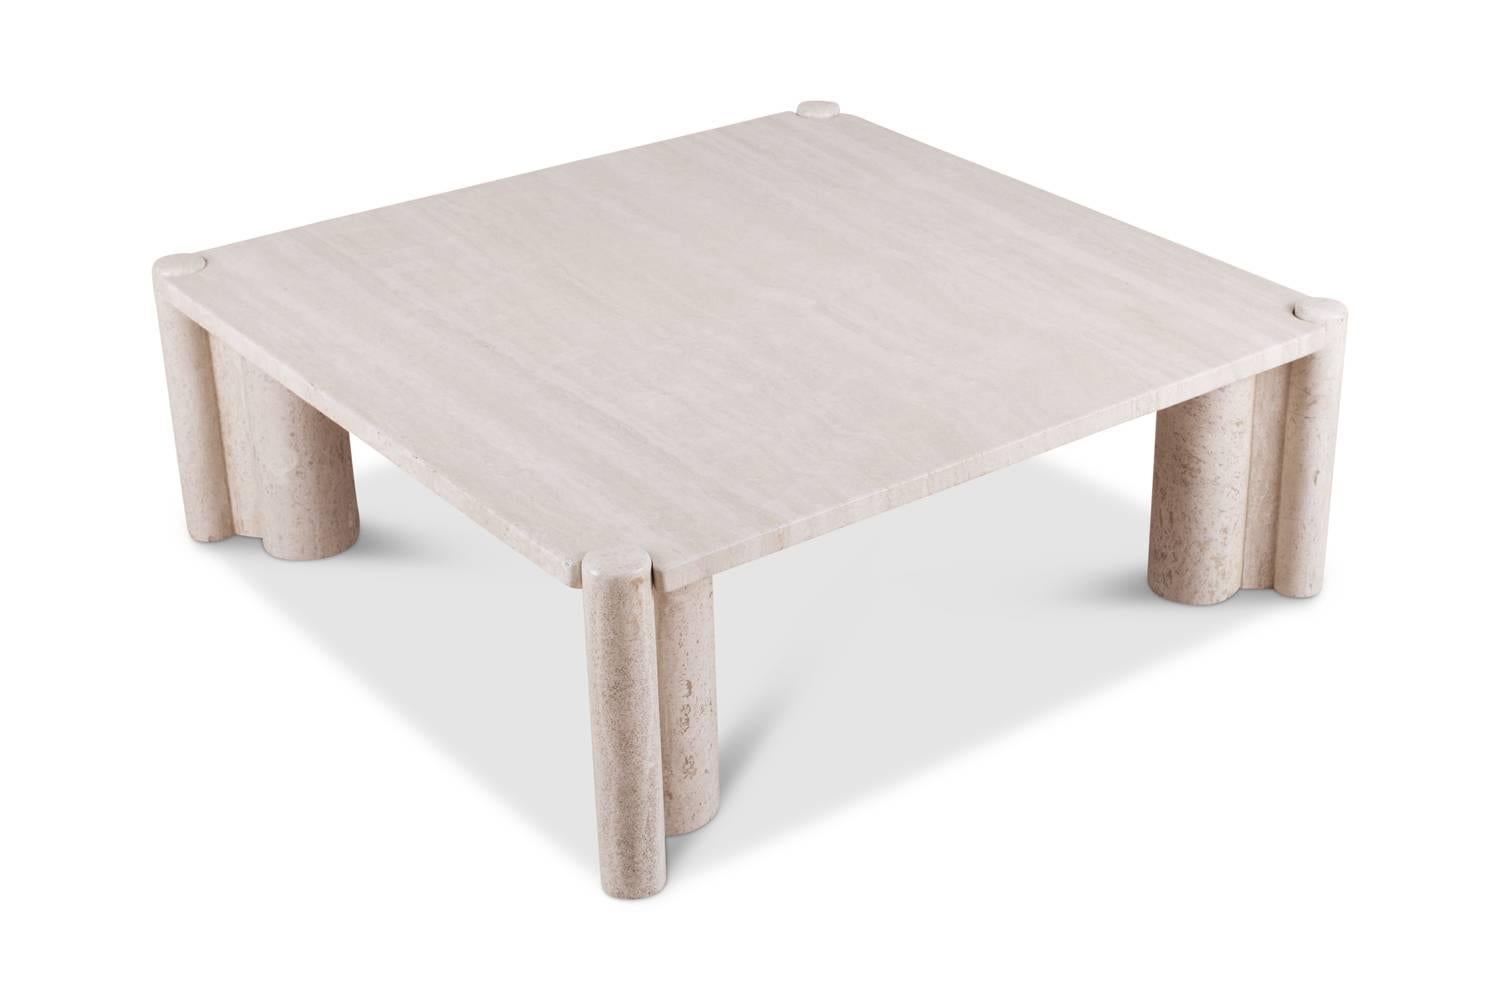 Mid-Century Modern Italian coffee table by Gae Aulenti, 1965
an early edition in travertine
the top and the legs come as five separate parts
Italian architect and designer Gae Aulenti studied architecture at the Politecnico di Milano.
A member